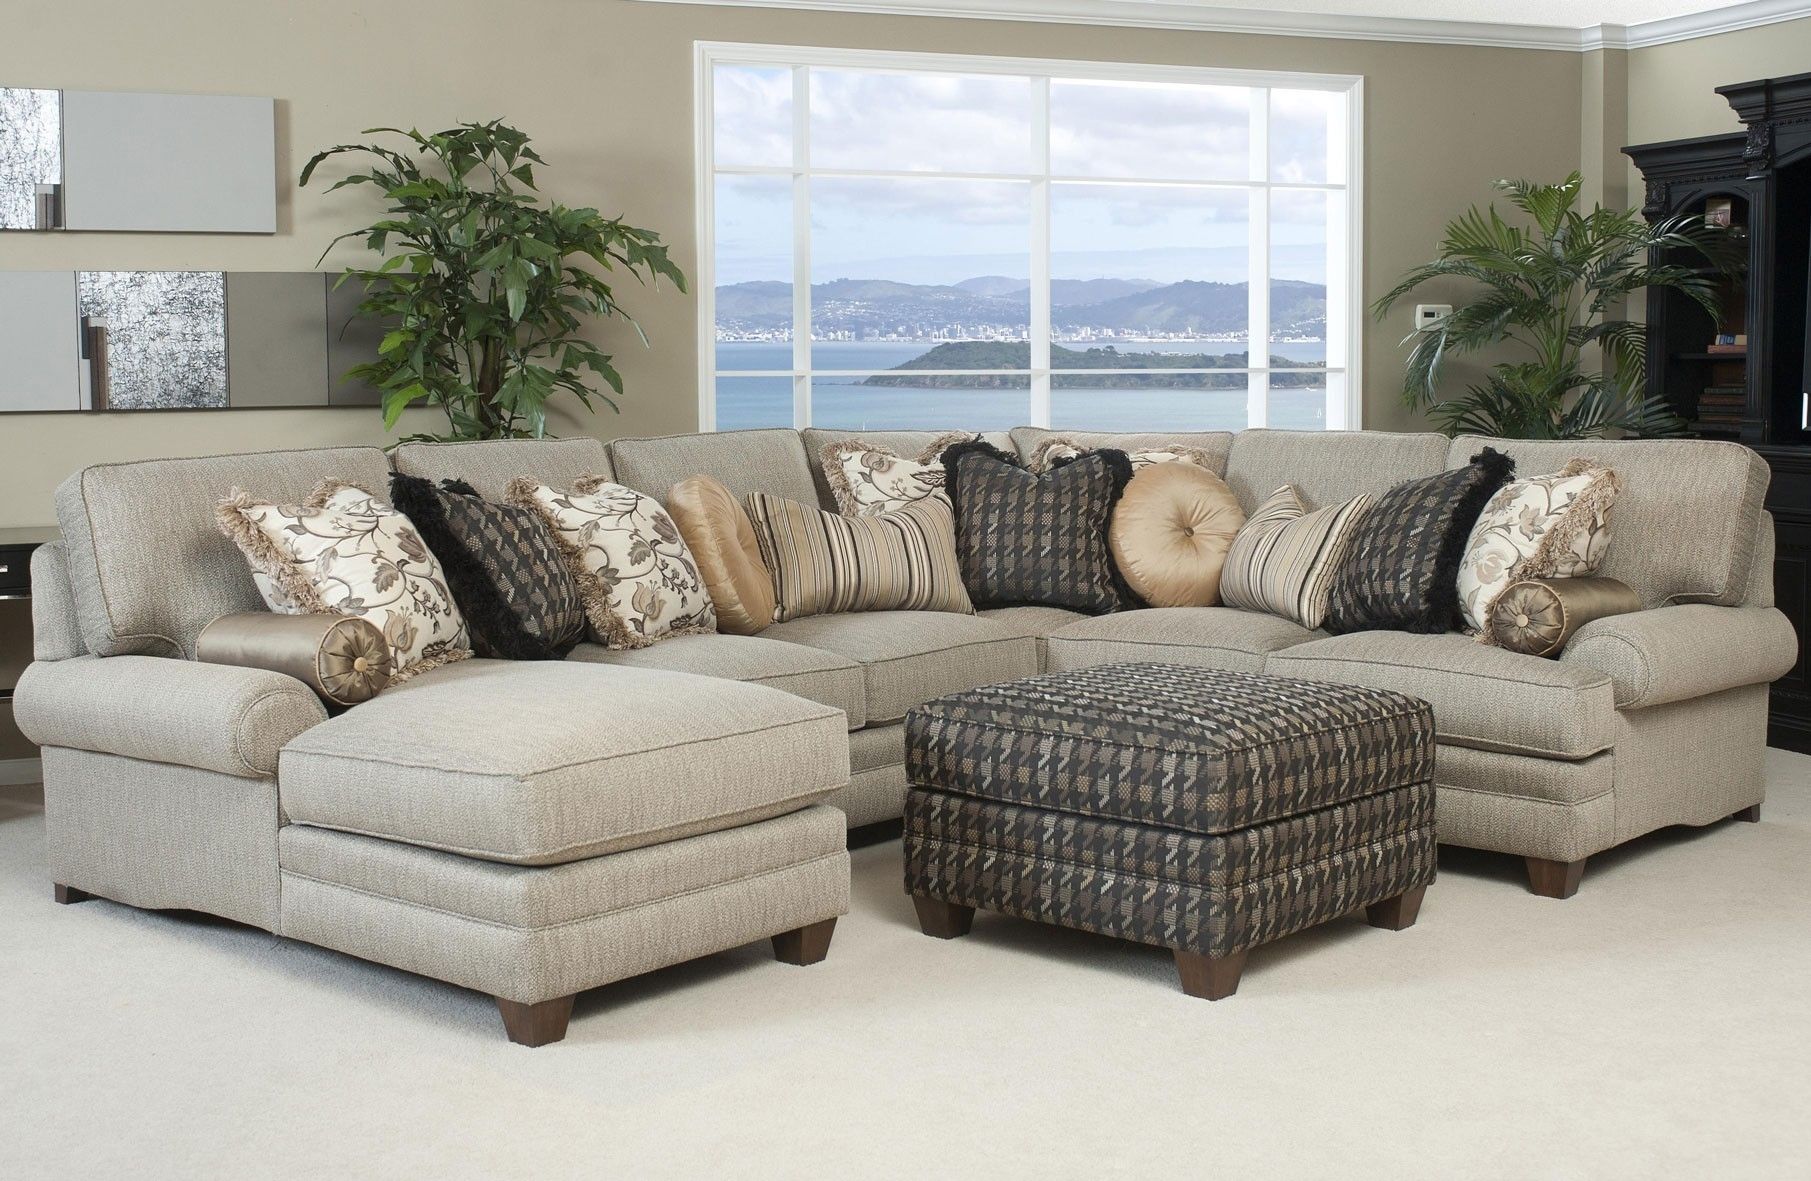 Cheap Sectional Sofas In Roanoke Va | Home Decoration Ideas Within Roanoke Va Sectional Sofas (Photo 4 of 10)